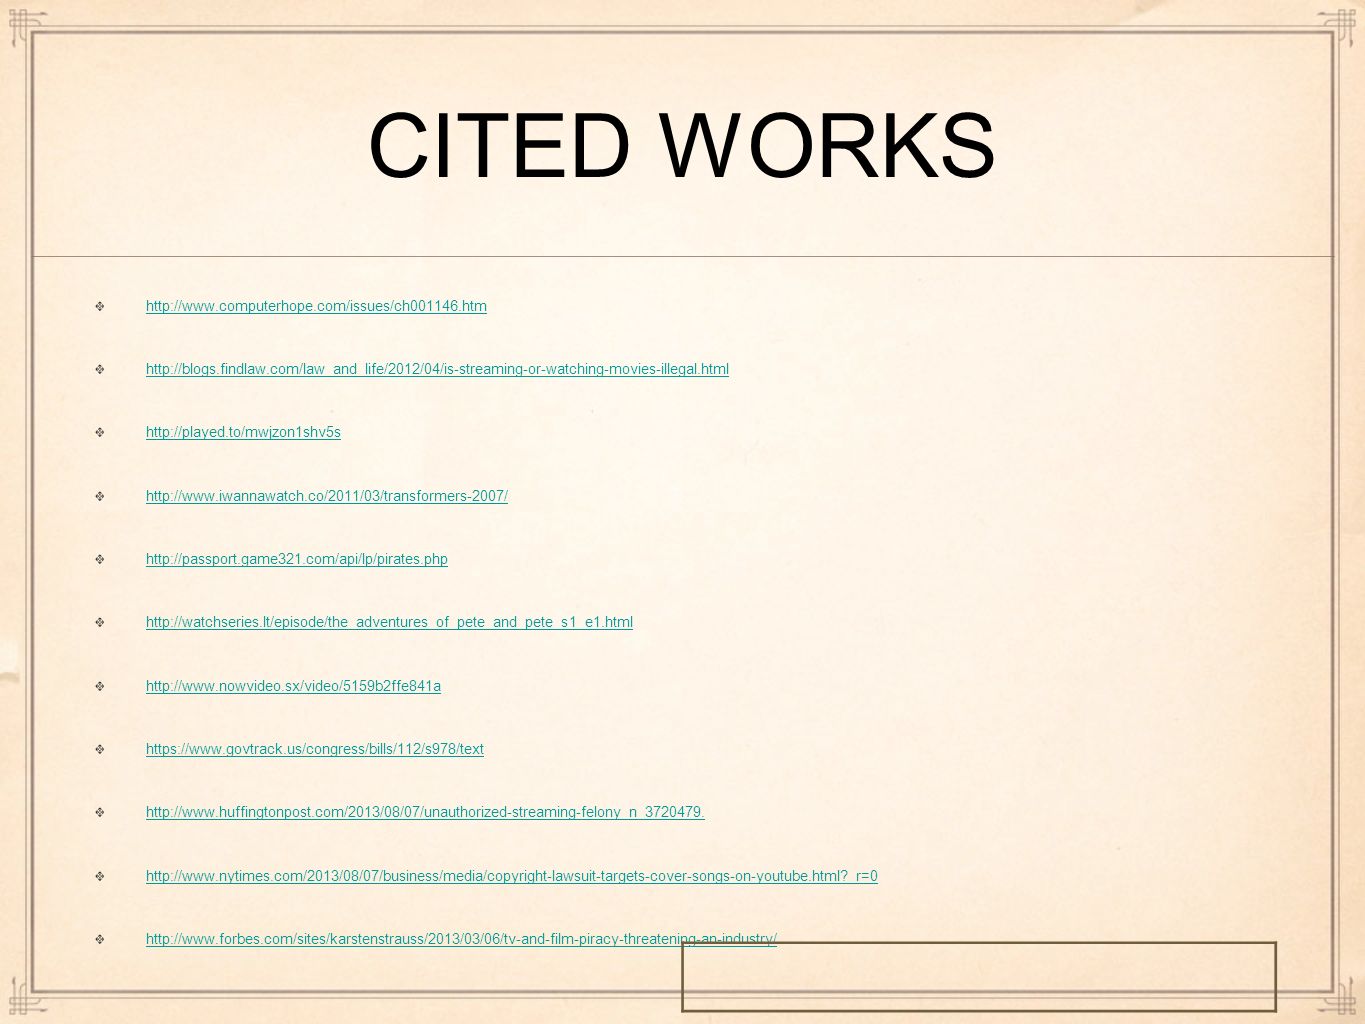 CITED WORKS